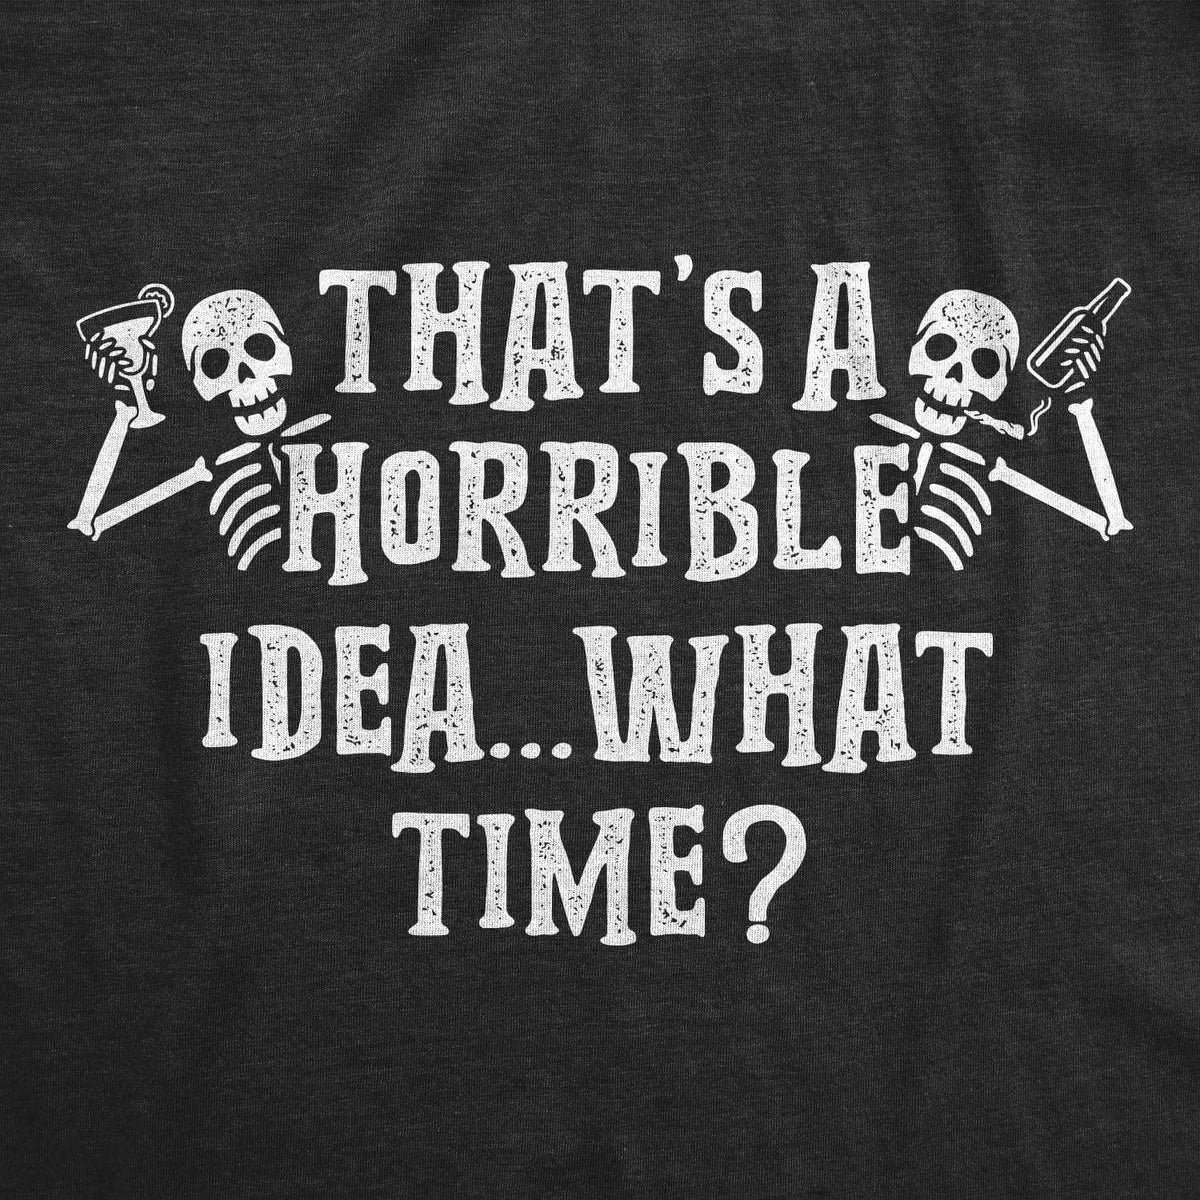 That&#39;s A Horrible Idea What Time Skeletons Men&#39;s Tshirt - Crazy Dog T-Shirts